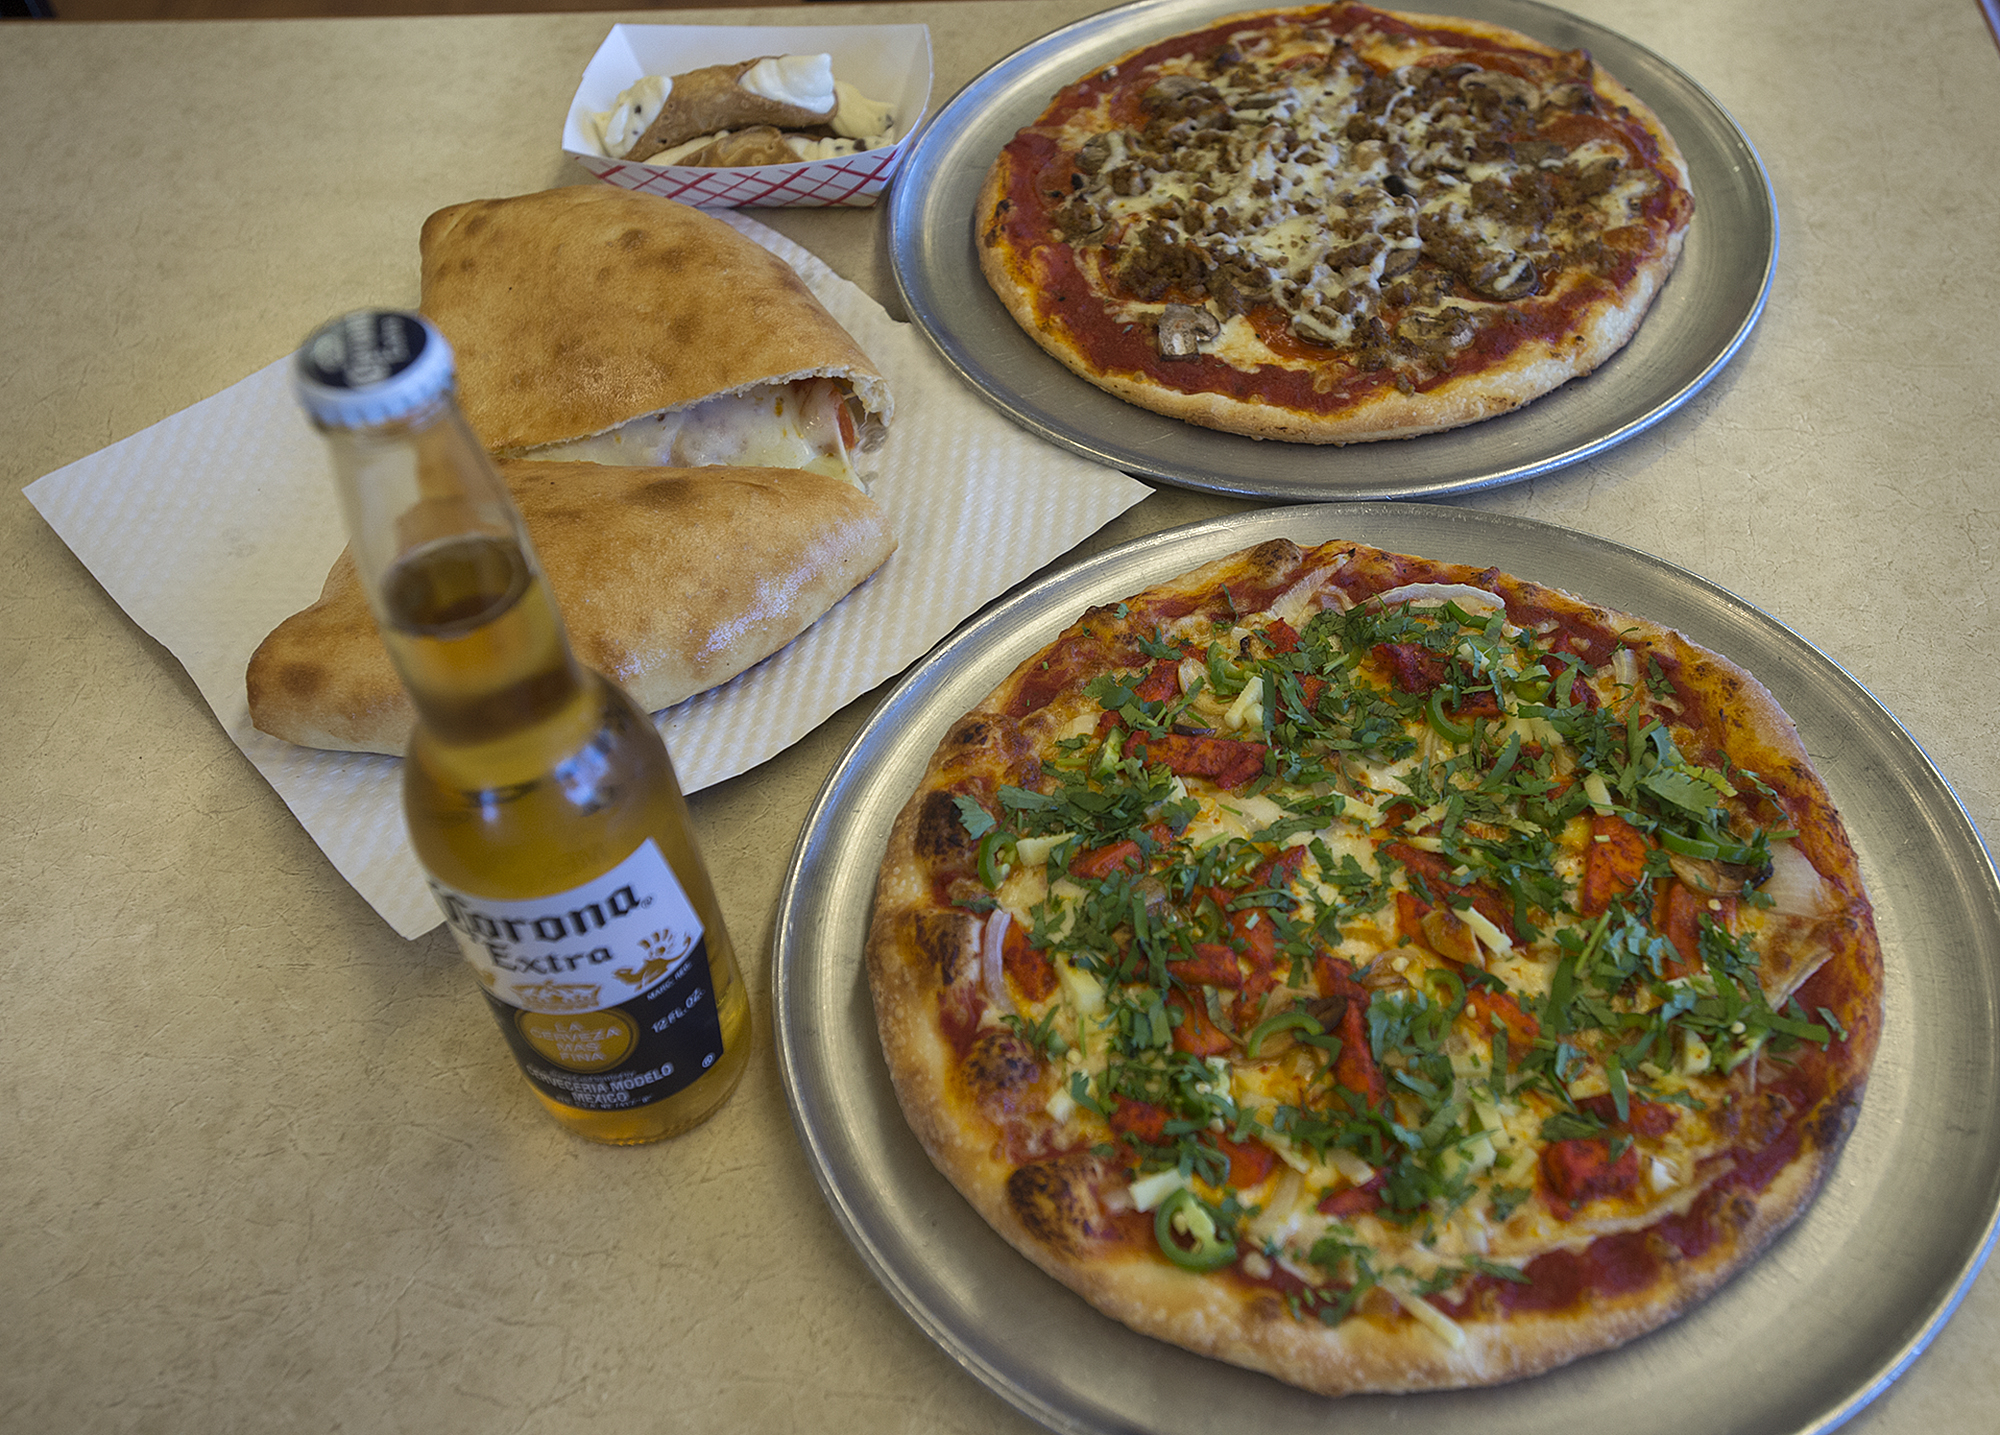 The Punjabi special, clockwise from bottom, a calzone with pepperoni and a NYC pizza is pictured at N.Y.C. Pizzeria on Friday afternoon, April 26, 2019.